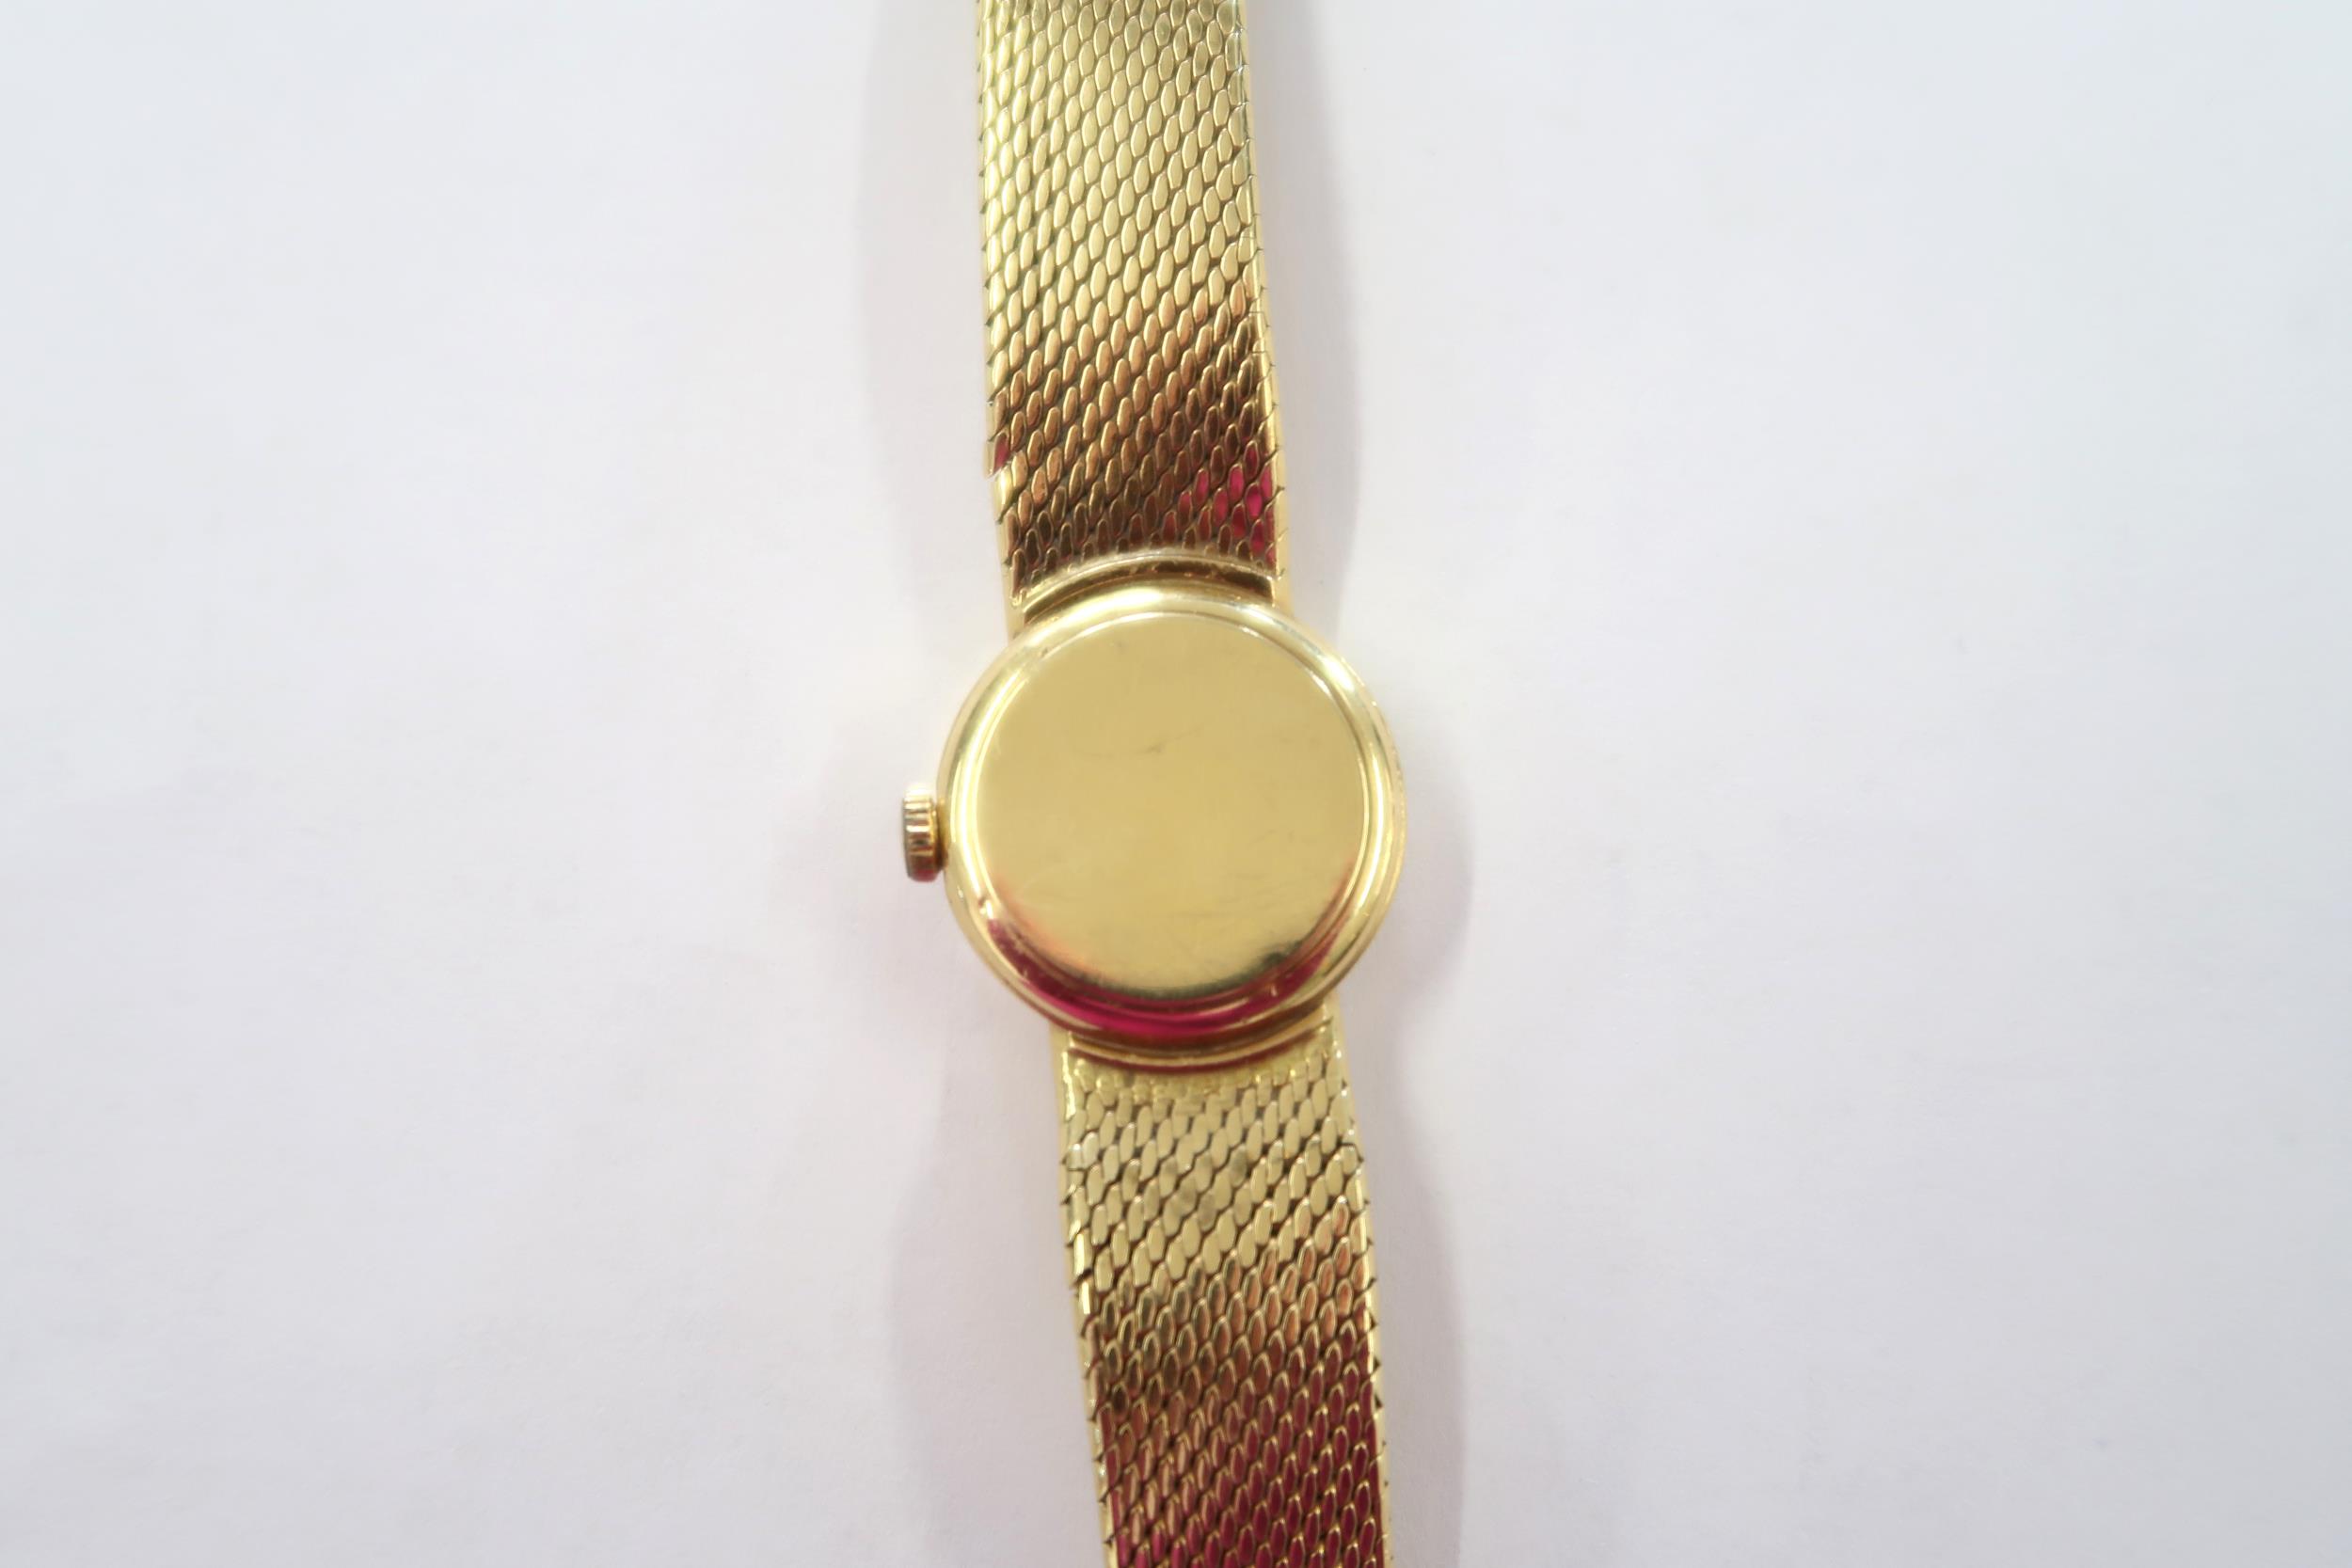 A ladies Omega wristwatch with an 18ct gold strap - approx weight 37.9 grams - Image 3 of 4